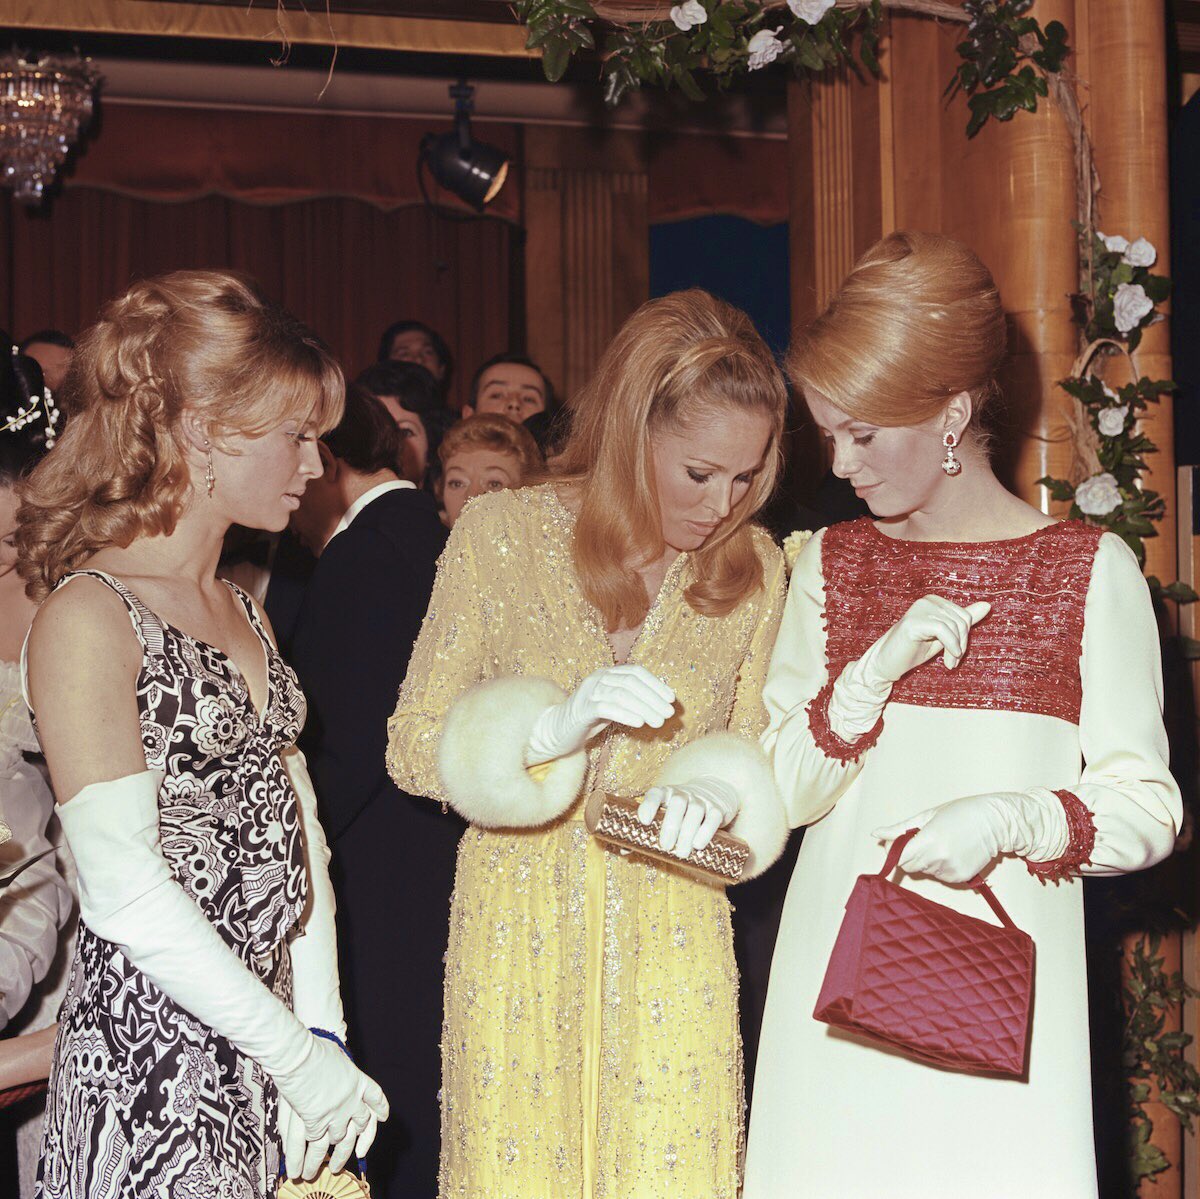 #JulieChristie, Ursula Andress and Catherine Deneuve attend a Royal Film Performance of ‘BORN FREE’ at the Odeon, Leicester Square, 14th March 1966

🎬 #SwingingSixties